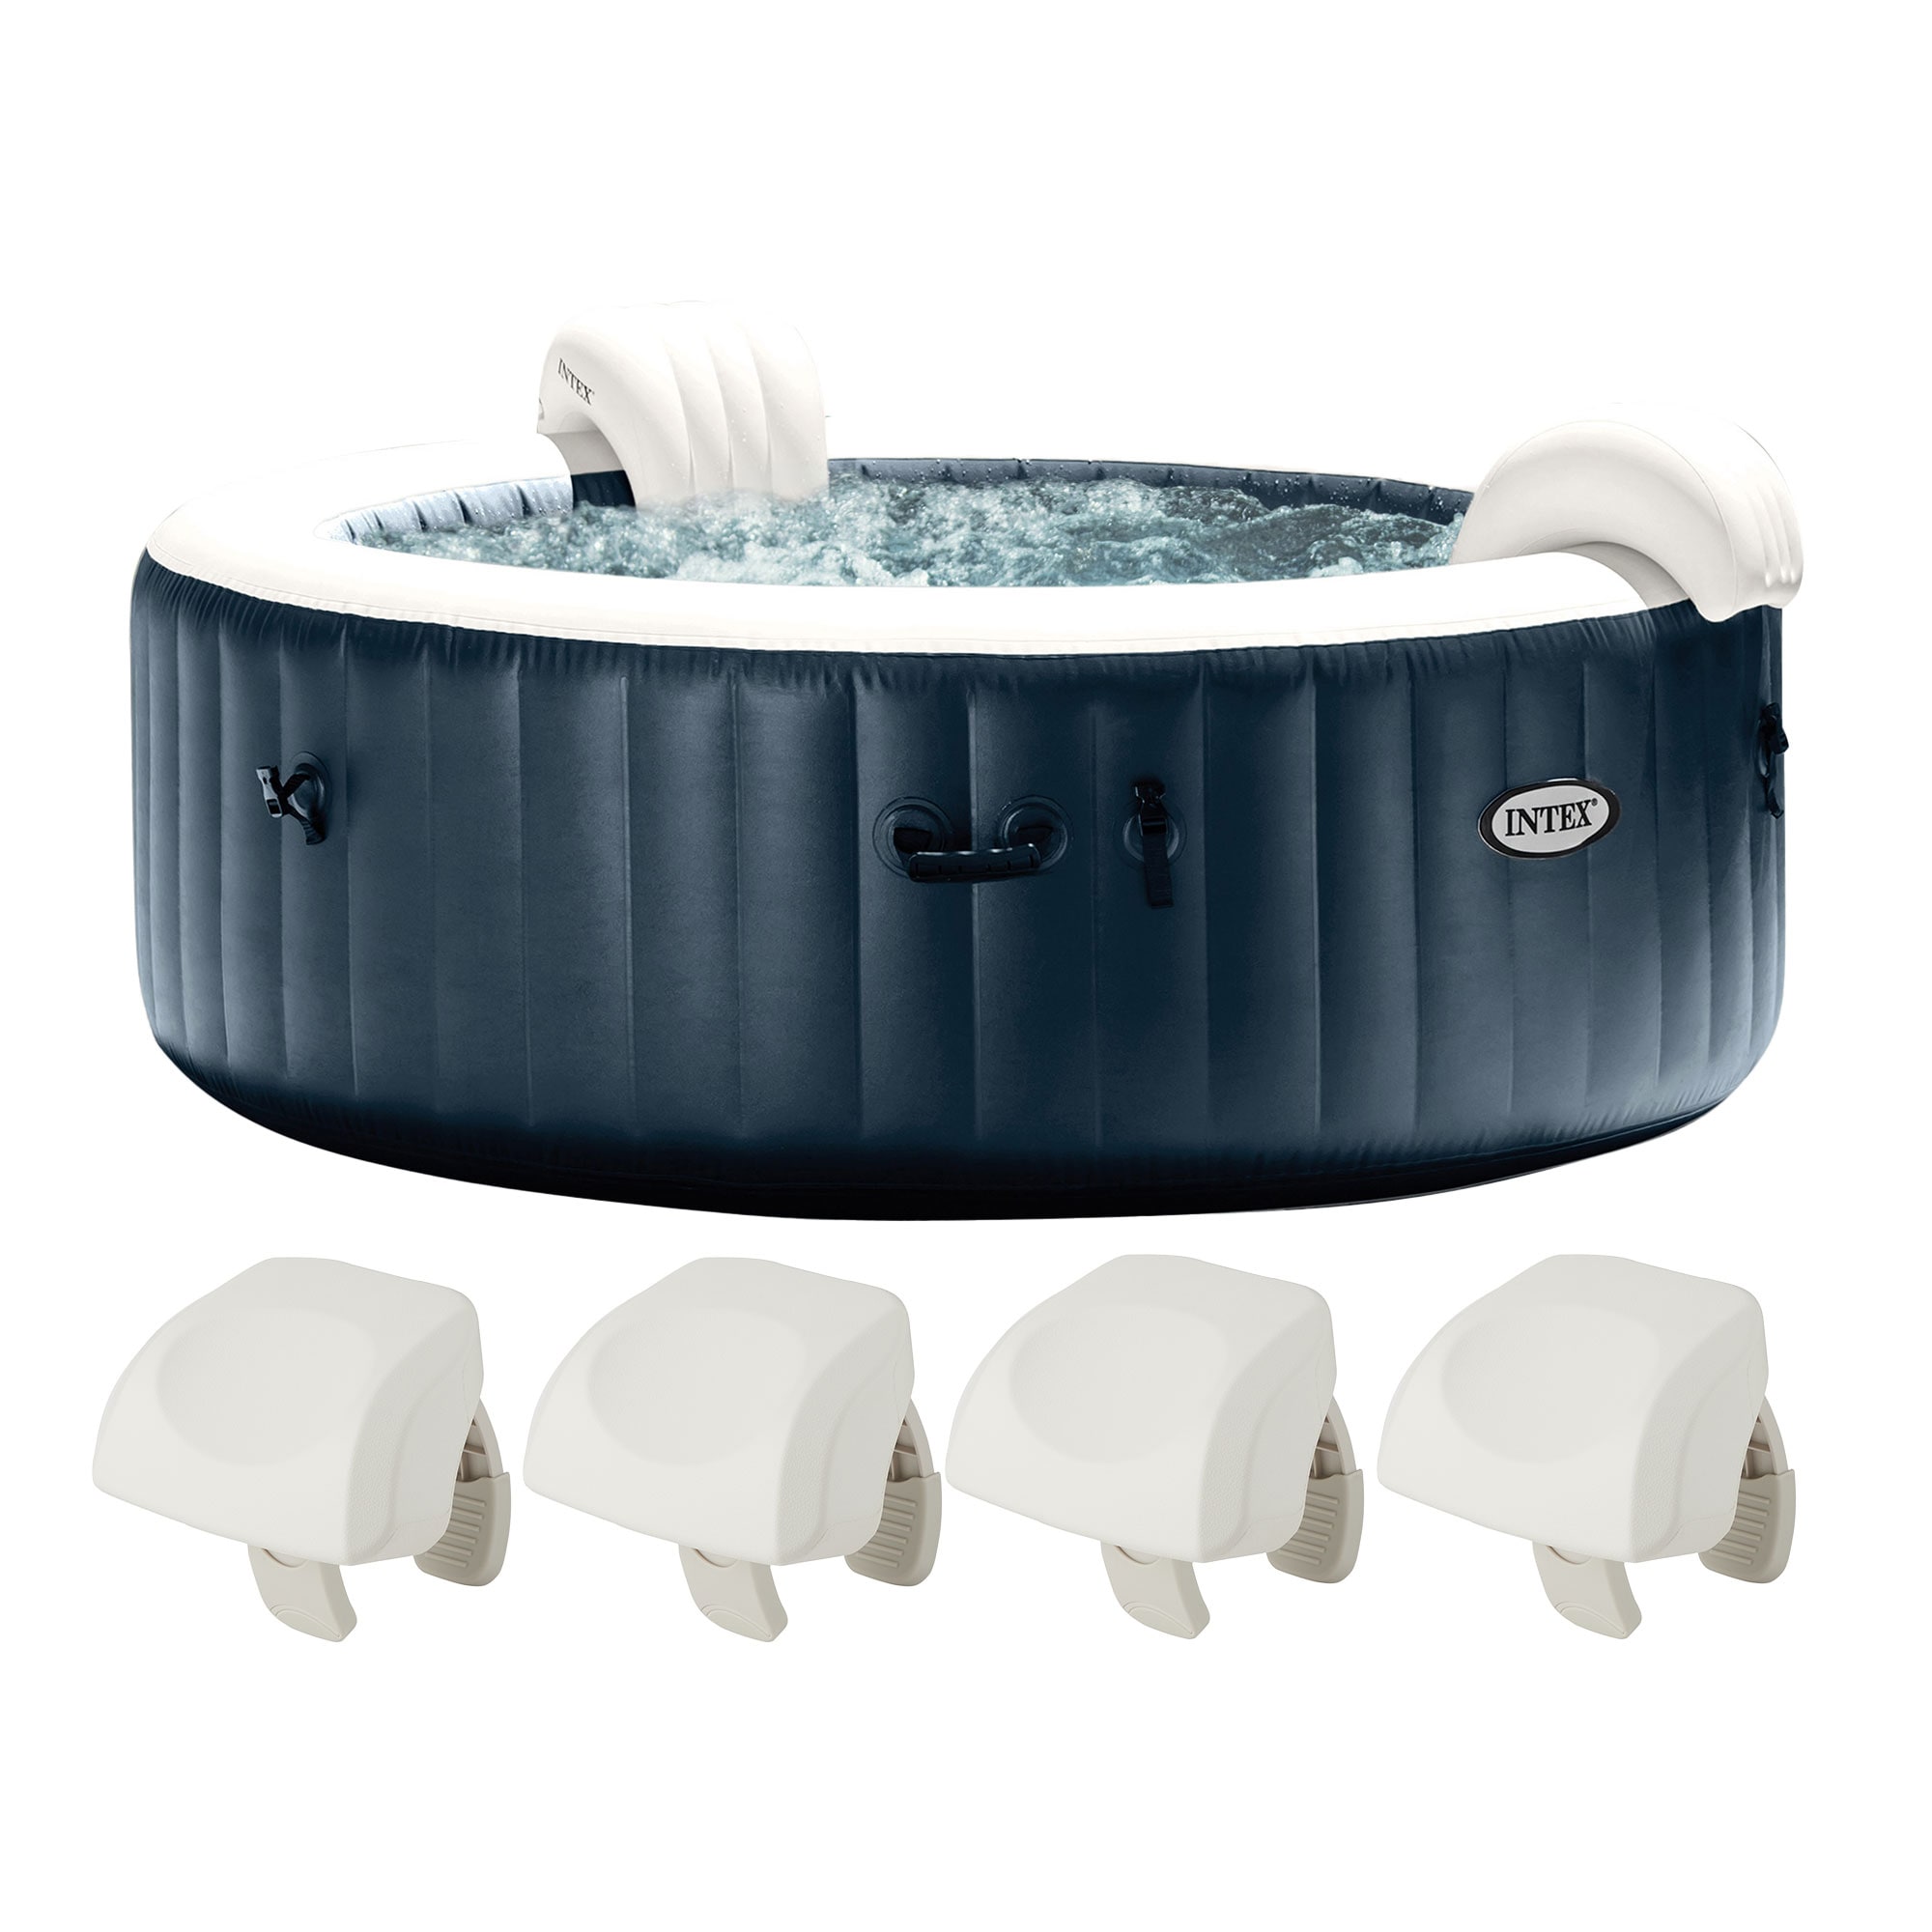 The leader in Above Ground Pools, Airbeds and Inflatable Spas - Intex